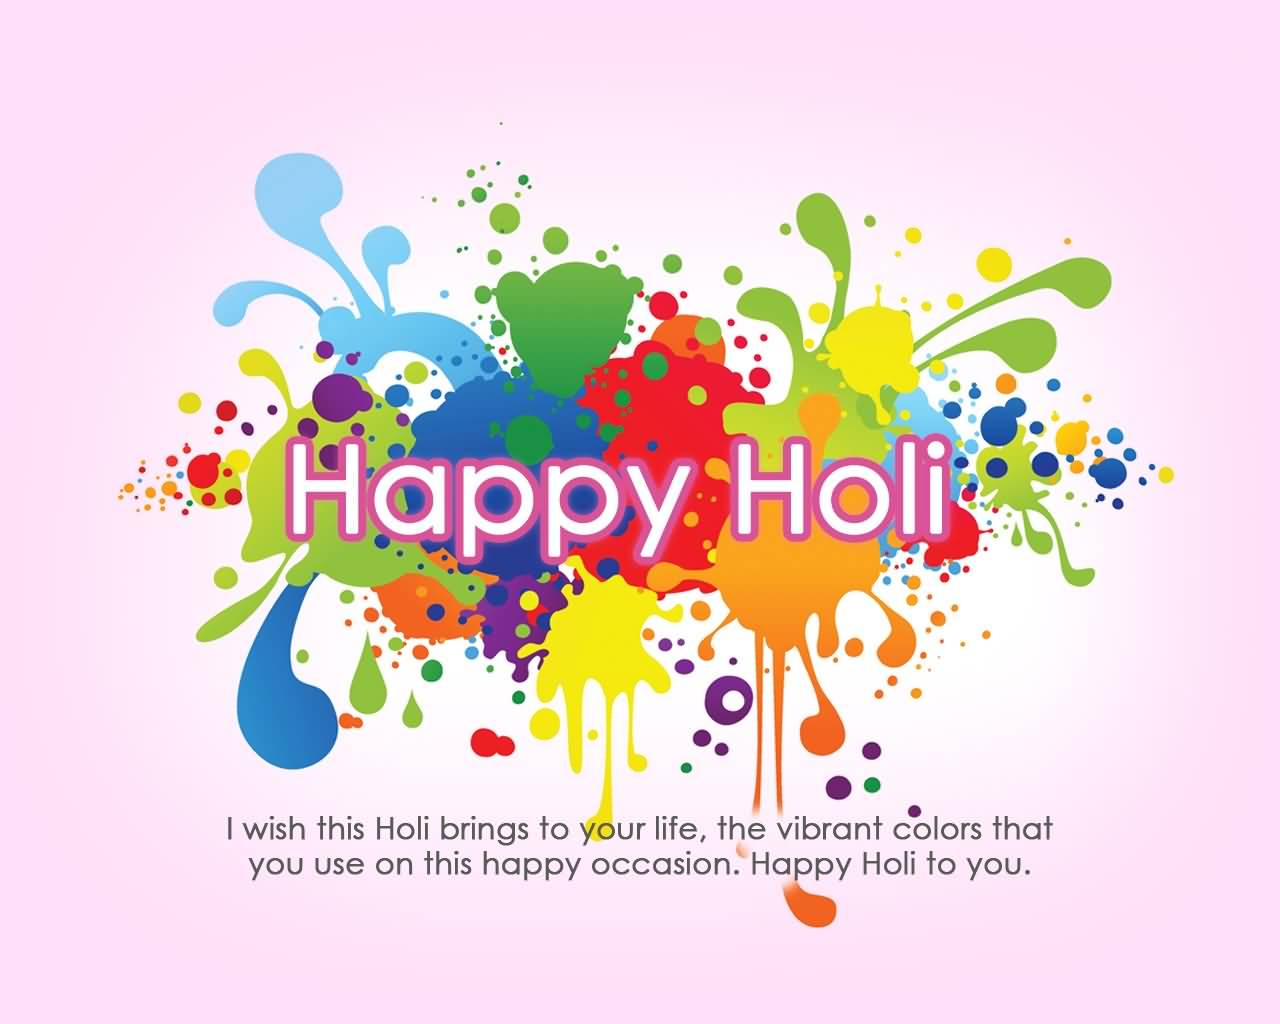 Happy Holi I Wish This Holi Brings To Your Life, The Vibrant Colors That You Use On This Happy Occasion. Happy Holi To You